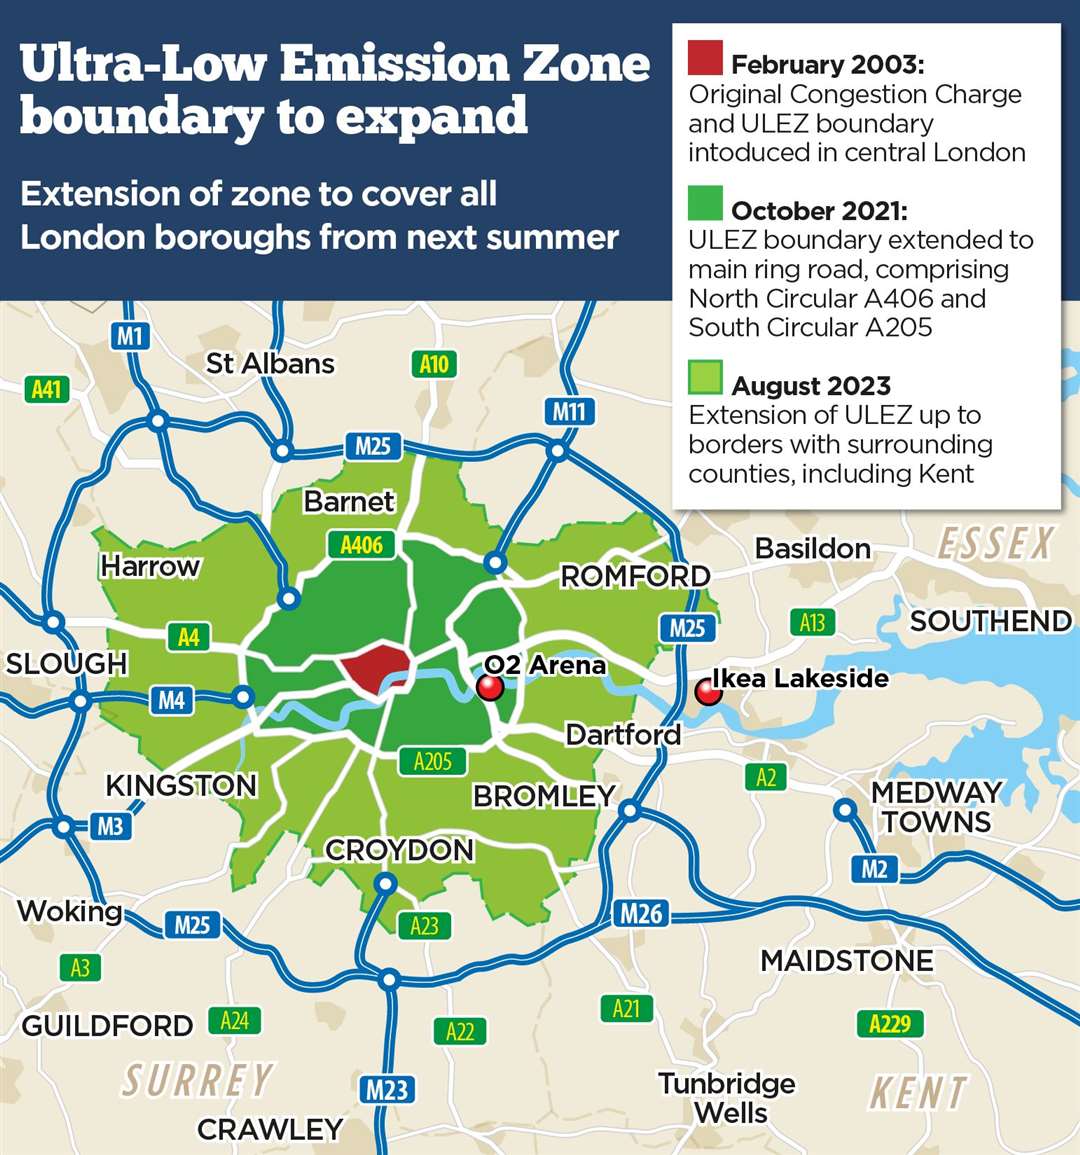 Here's where the ULEZ expansion will reach